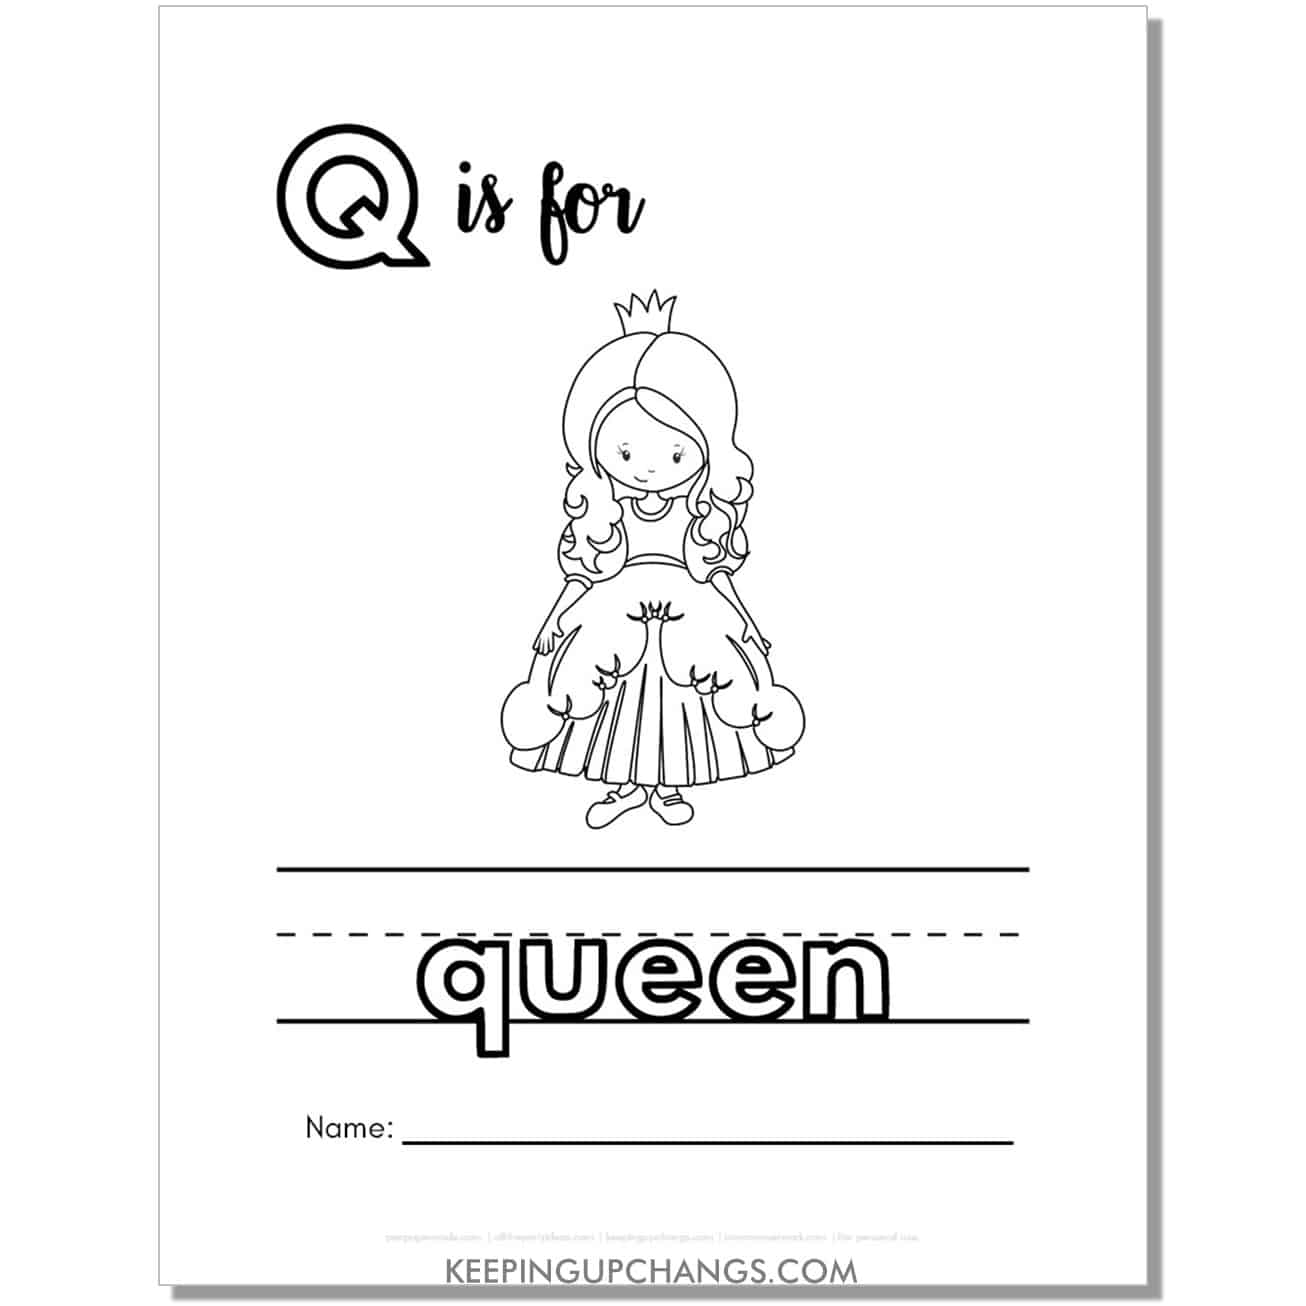 cute letter q coloring page worksheet with queen.